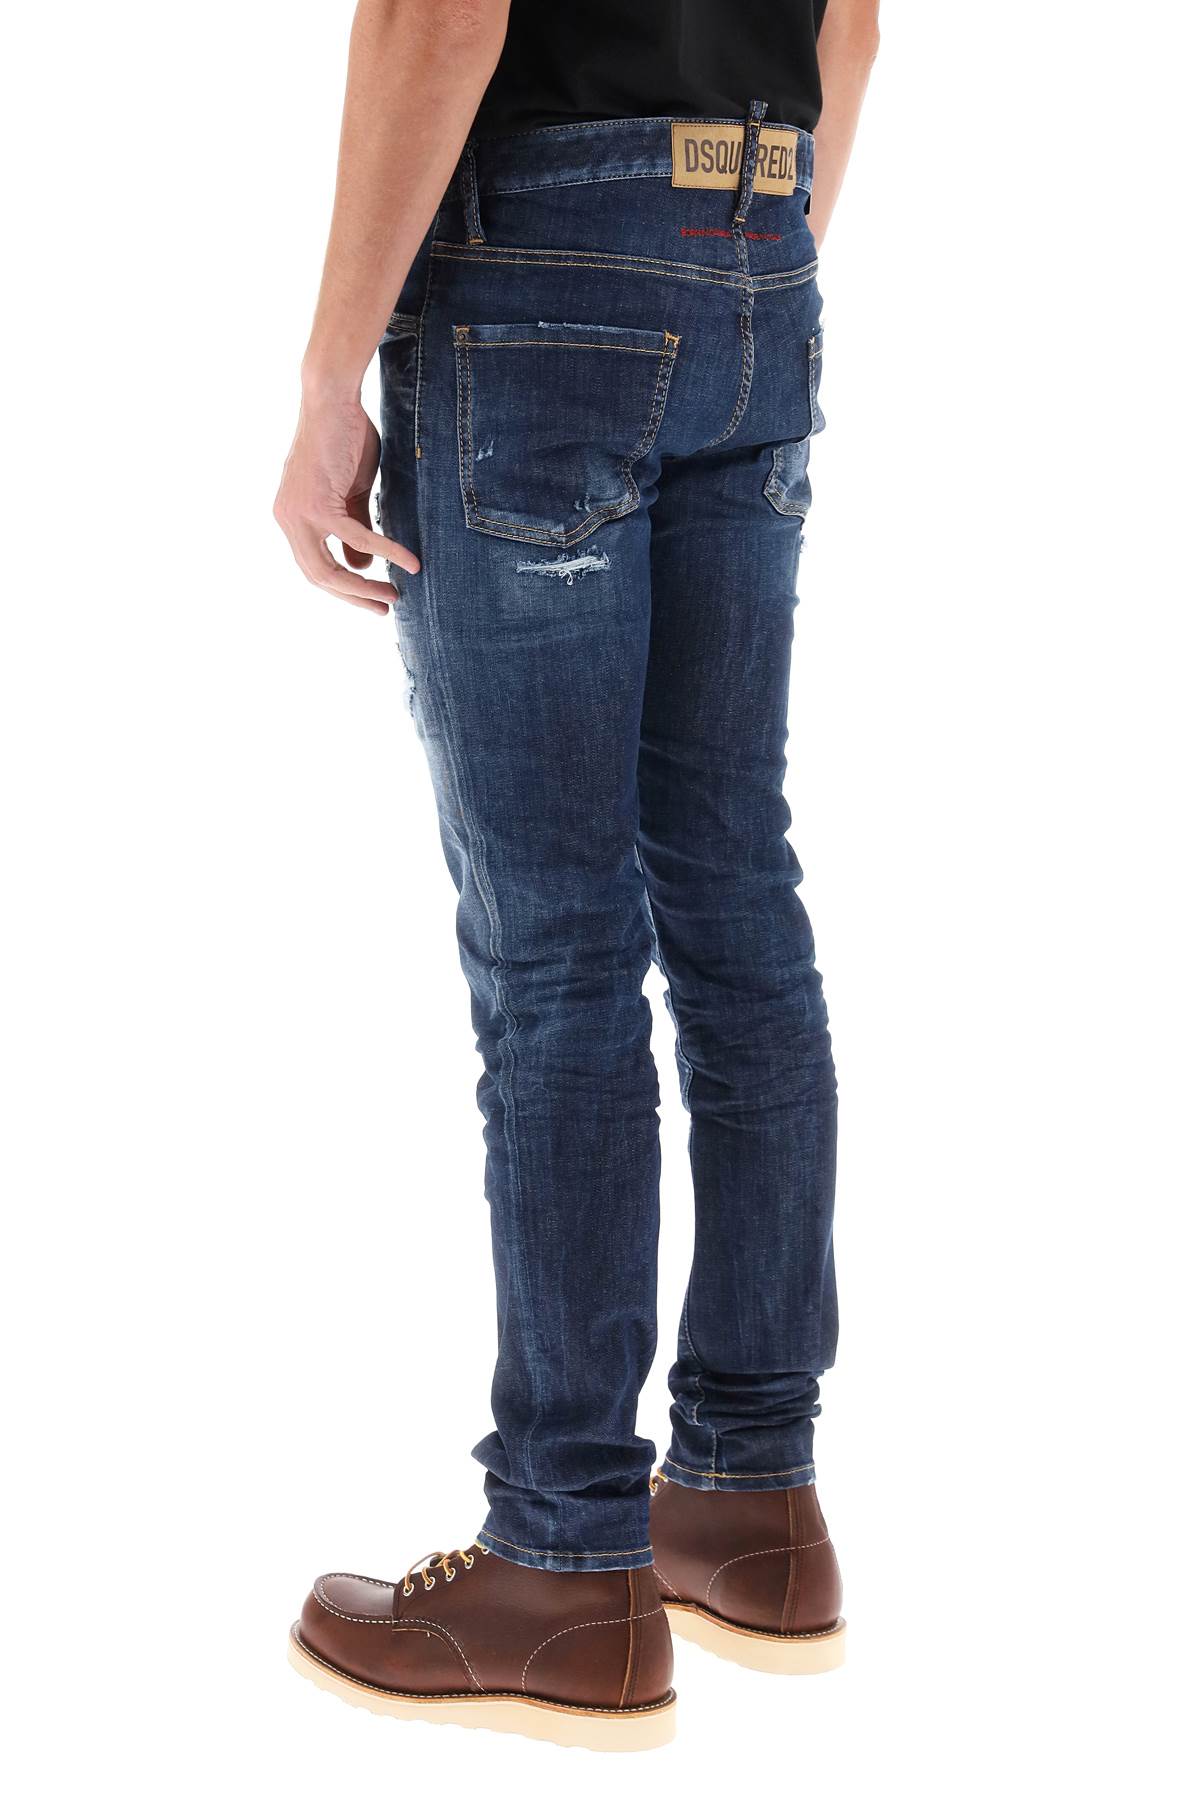 Dsquared2 Dsquared2 dark ripped wash cool guy jeans